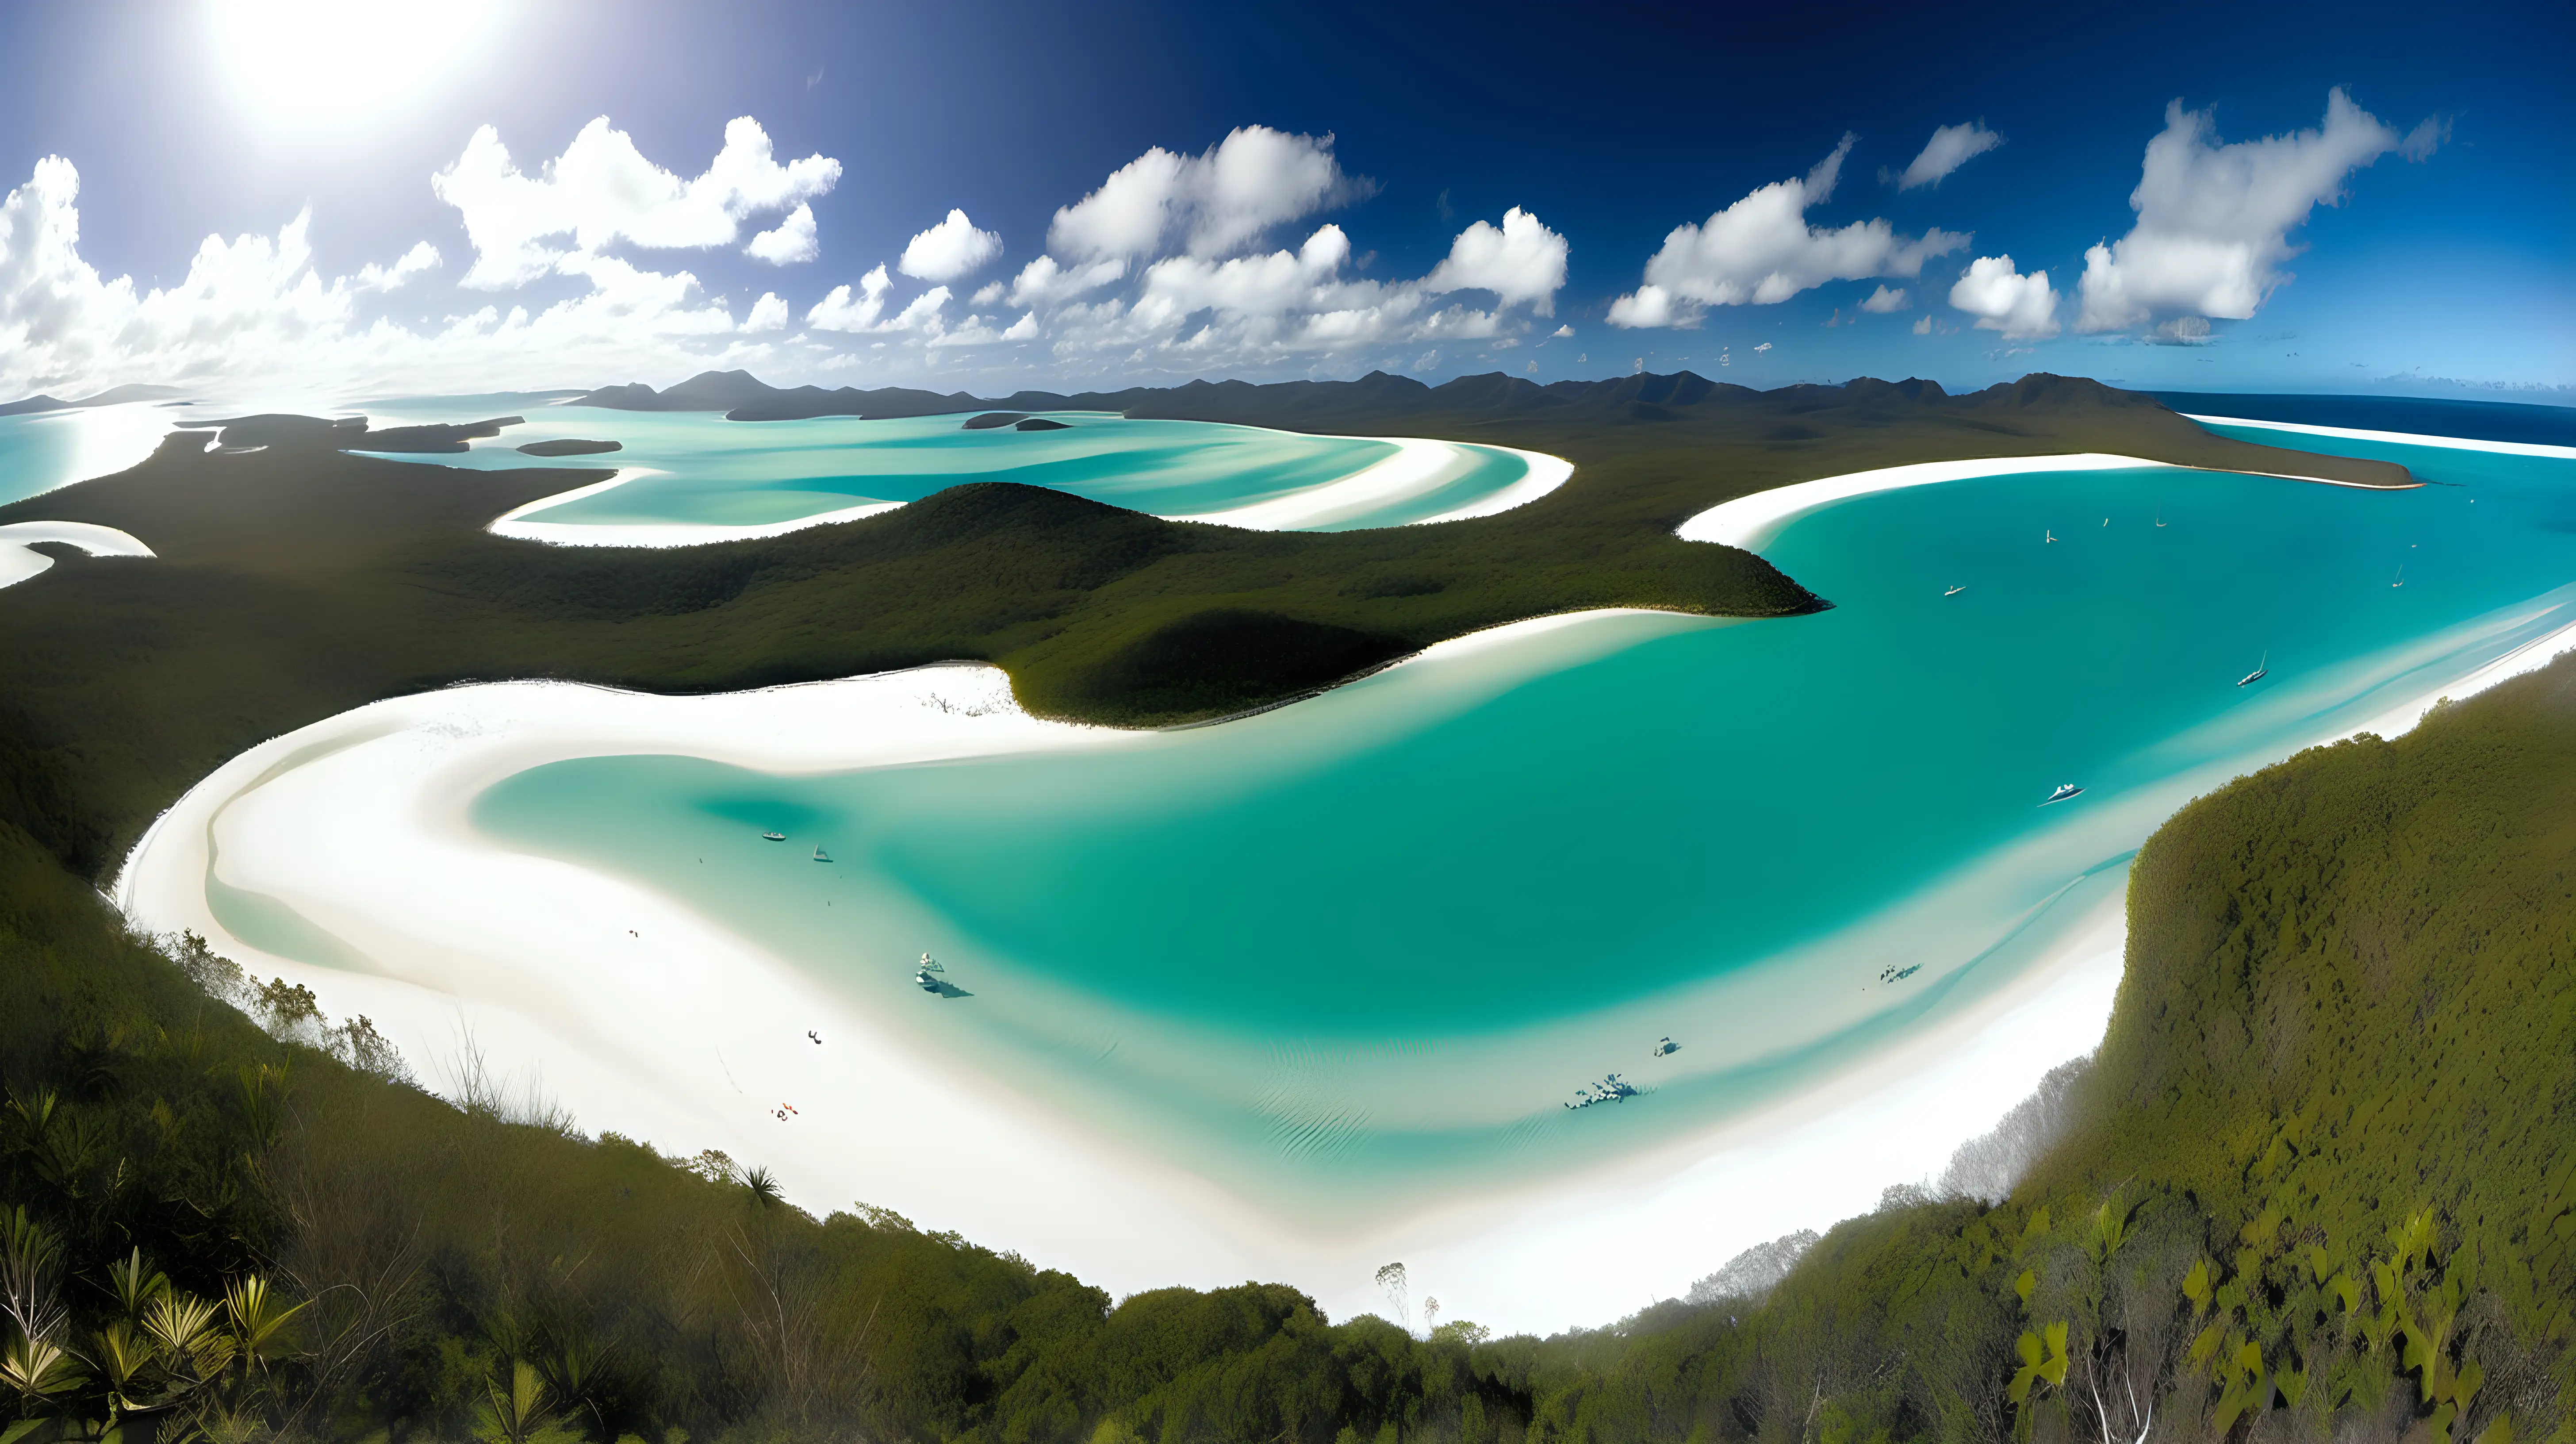 show Whitehaven Beach, Australia at its best shape and show its beauty roylaty and greatness,a wide angle image showing Whitehaven Beach, Australia at its peak beauty